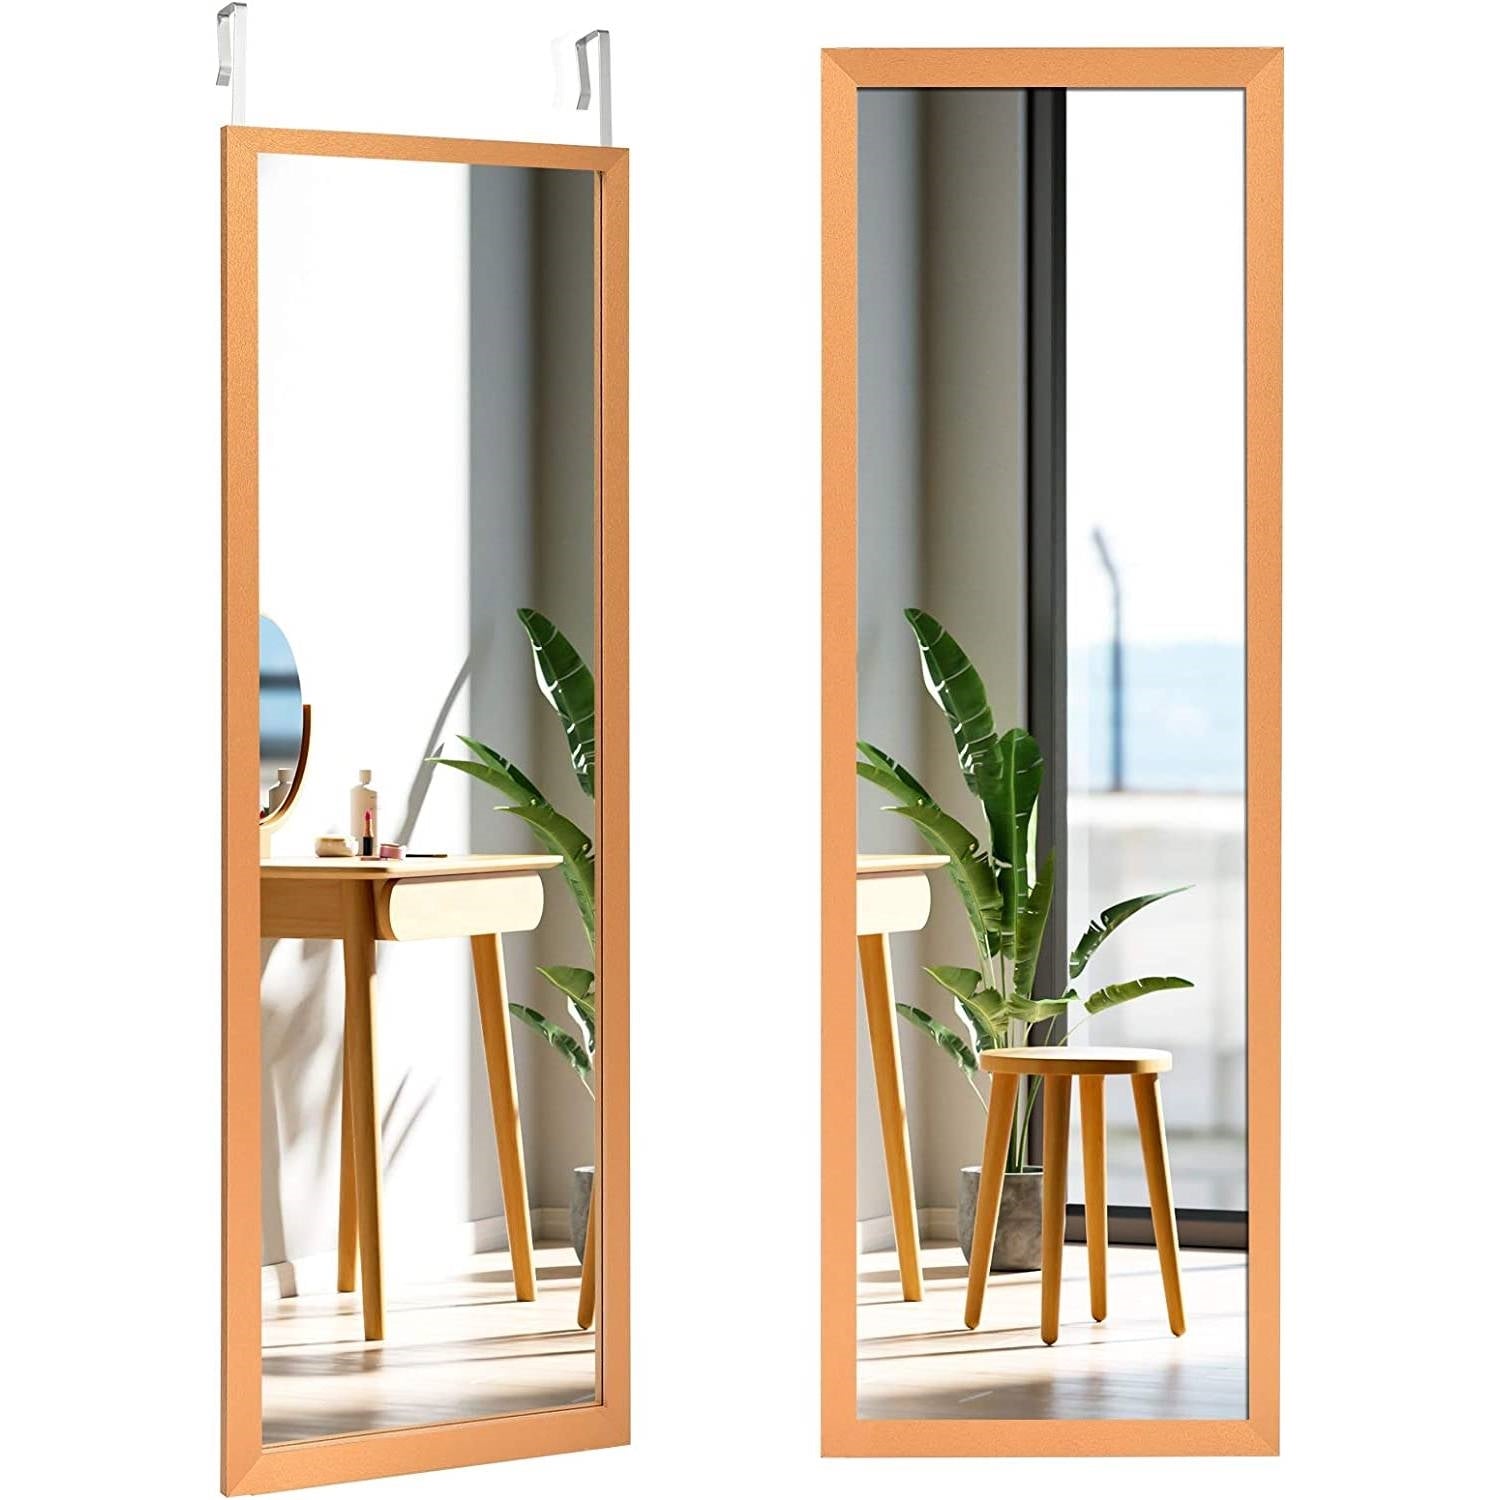 Gold Full Length Bedroom Mirror with Over the Door or Wall Mounted Design